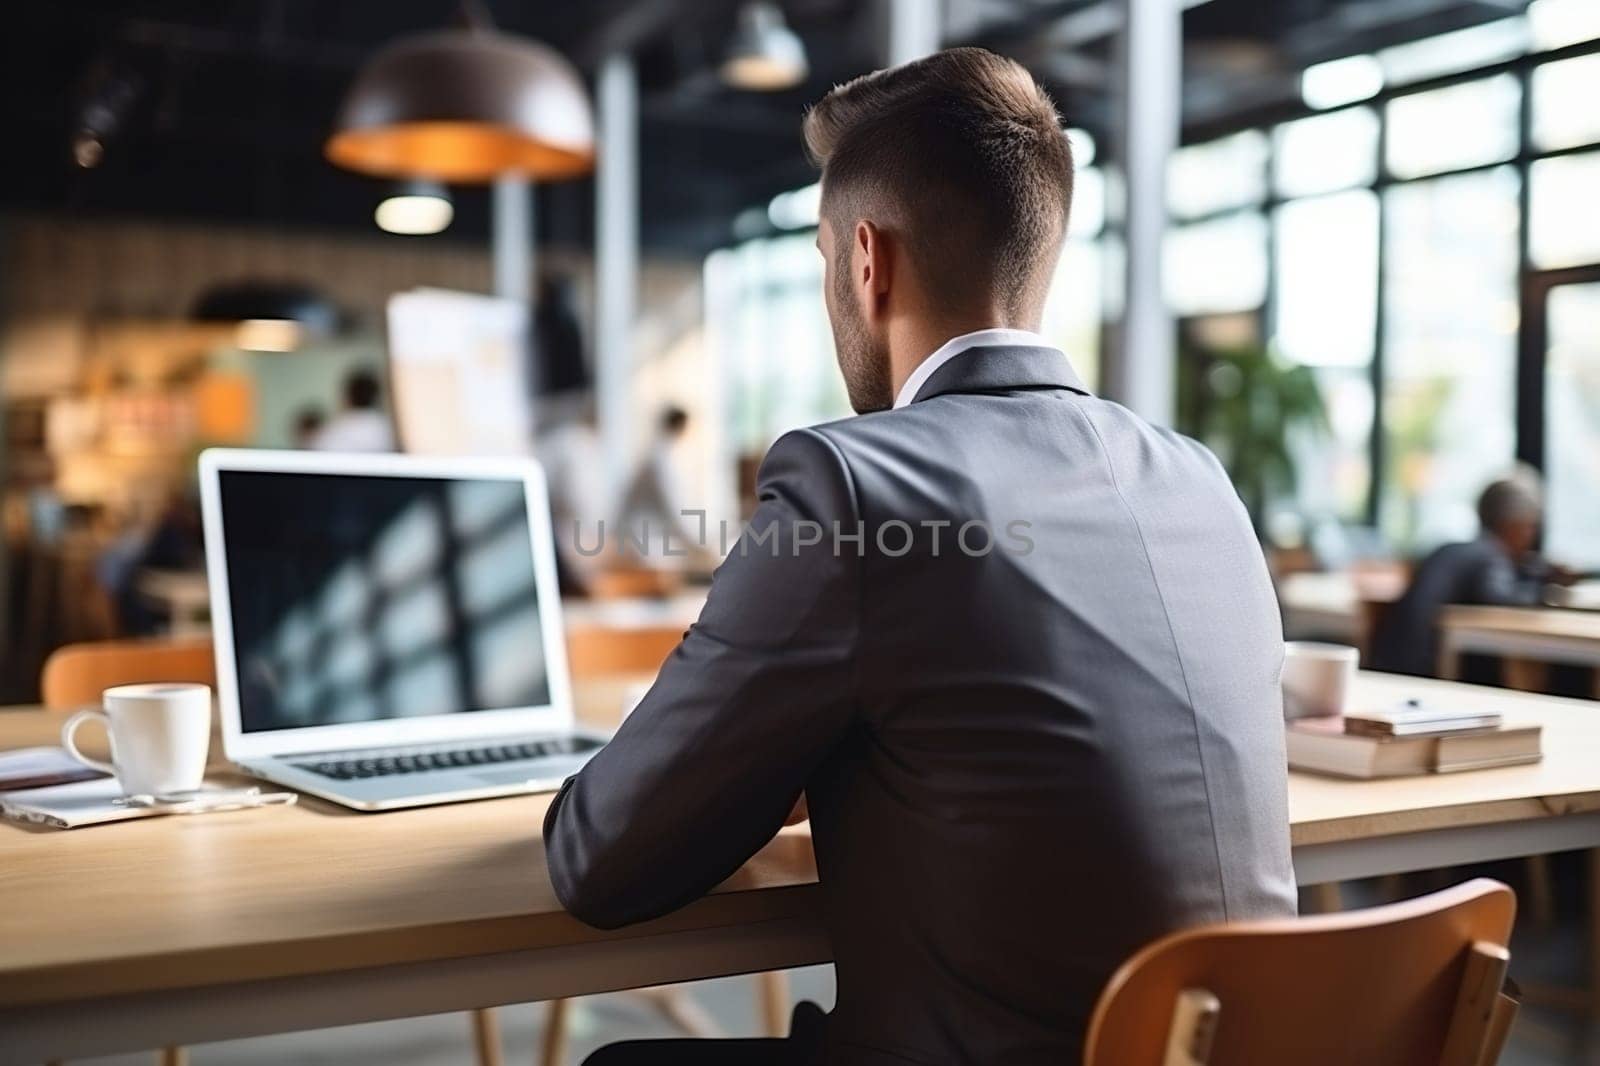 A man in a business suit with a laptop sits in a cafe. Back view. Remote work concept. Generated by artificial intelligence by Vovmar